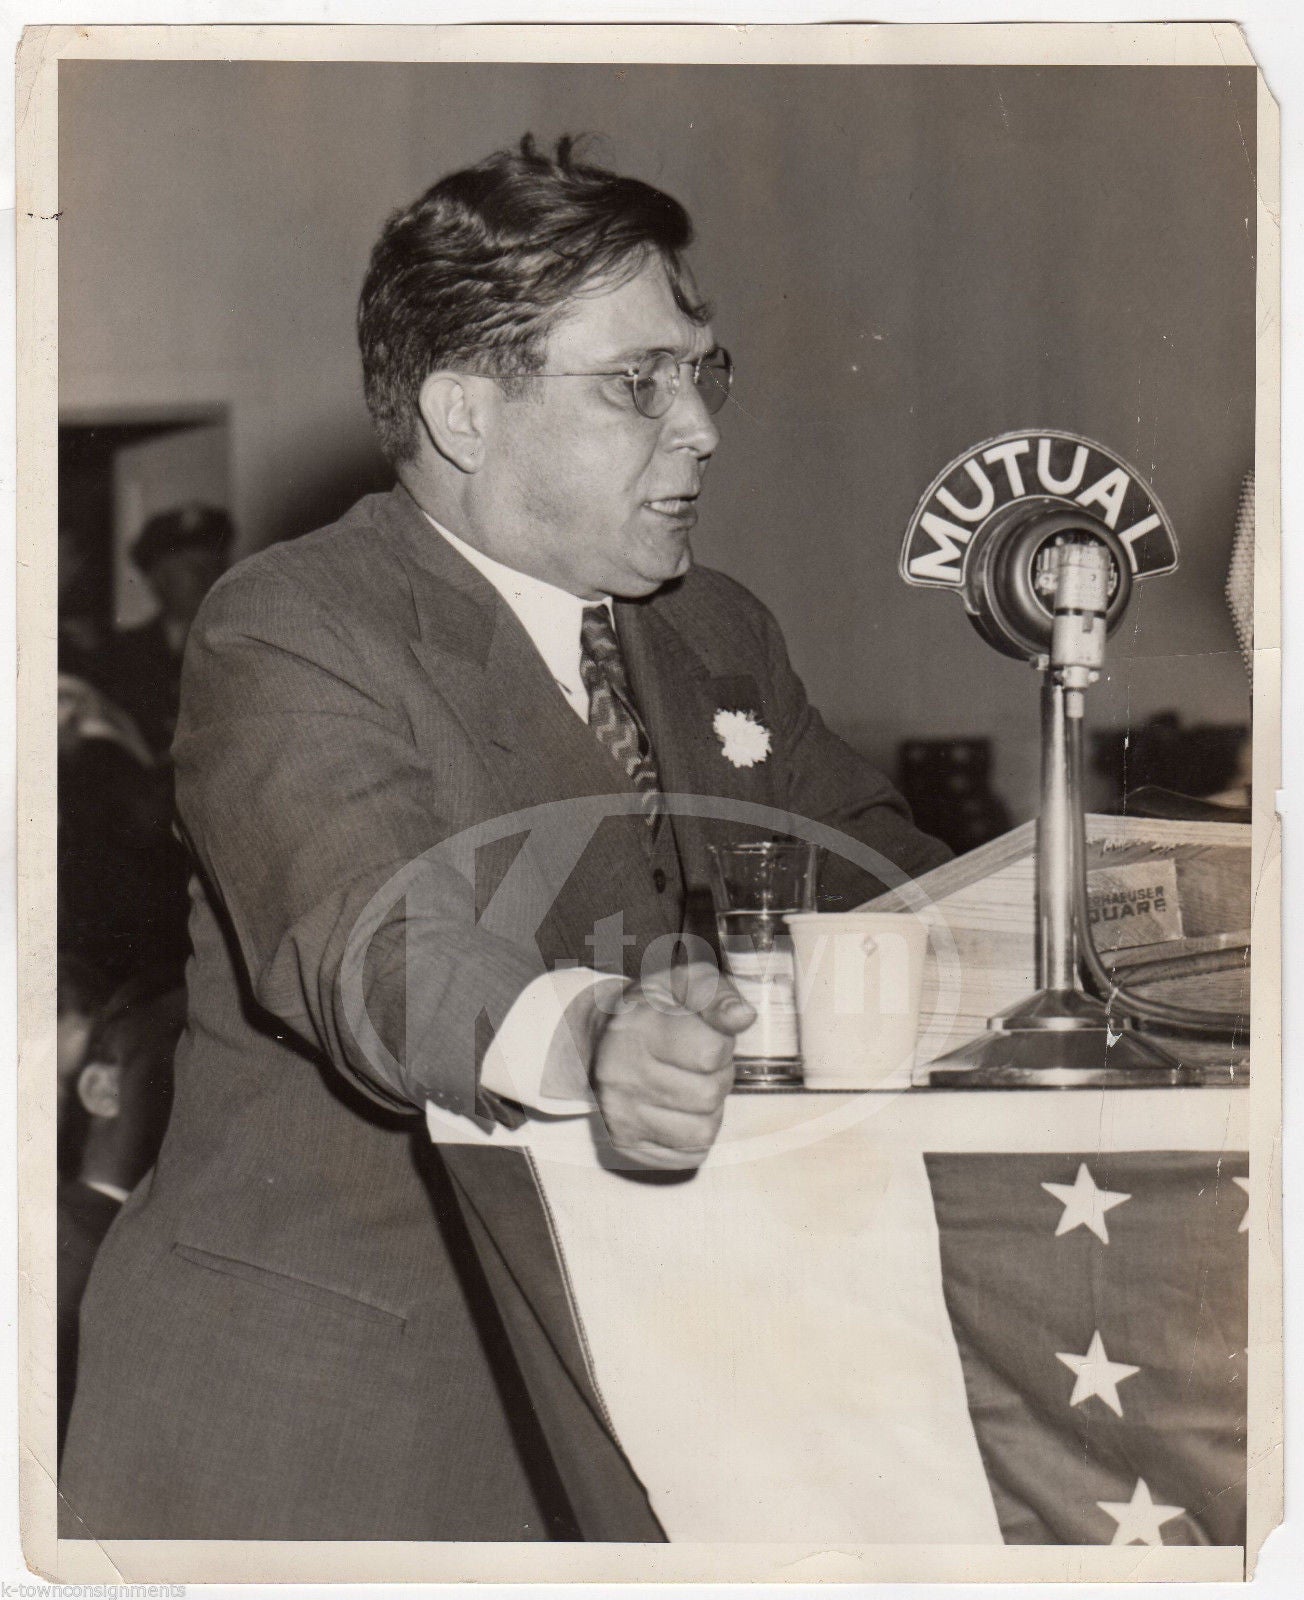 WENDELL WILLKIE ANTI-NEW DEAL PRESIDENTIAL CANDIDATE VINTAGE NEWS PRESS PHOTO - K-townConsignments